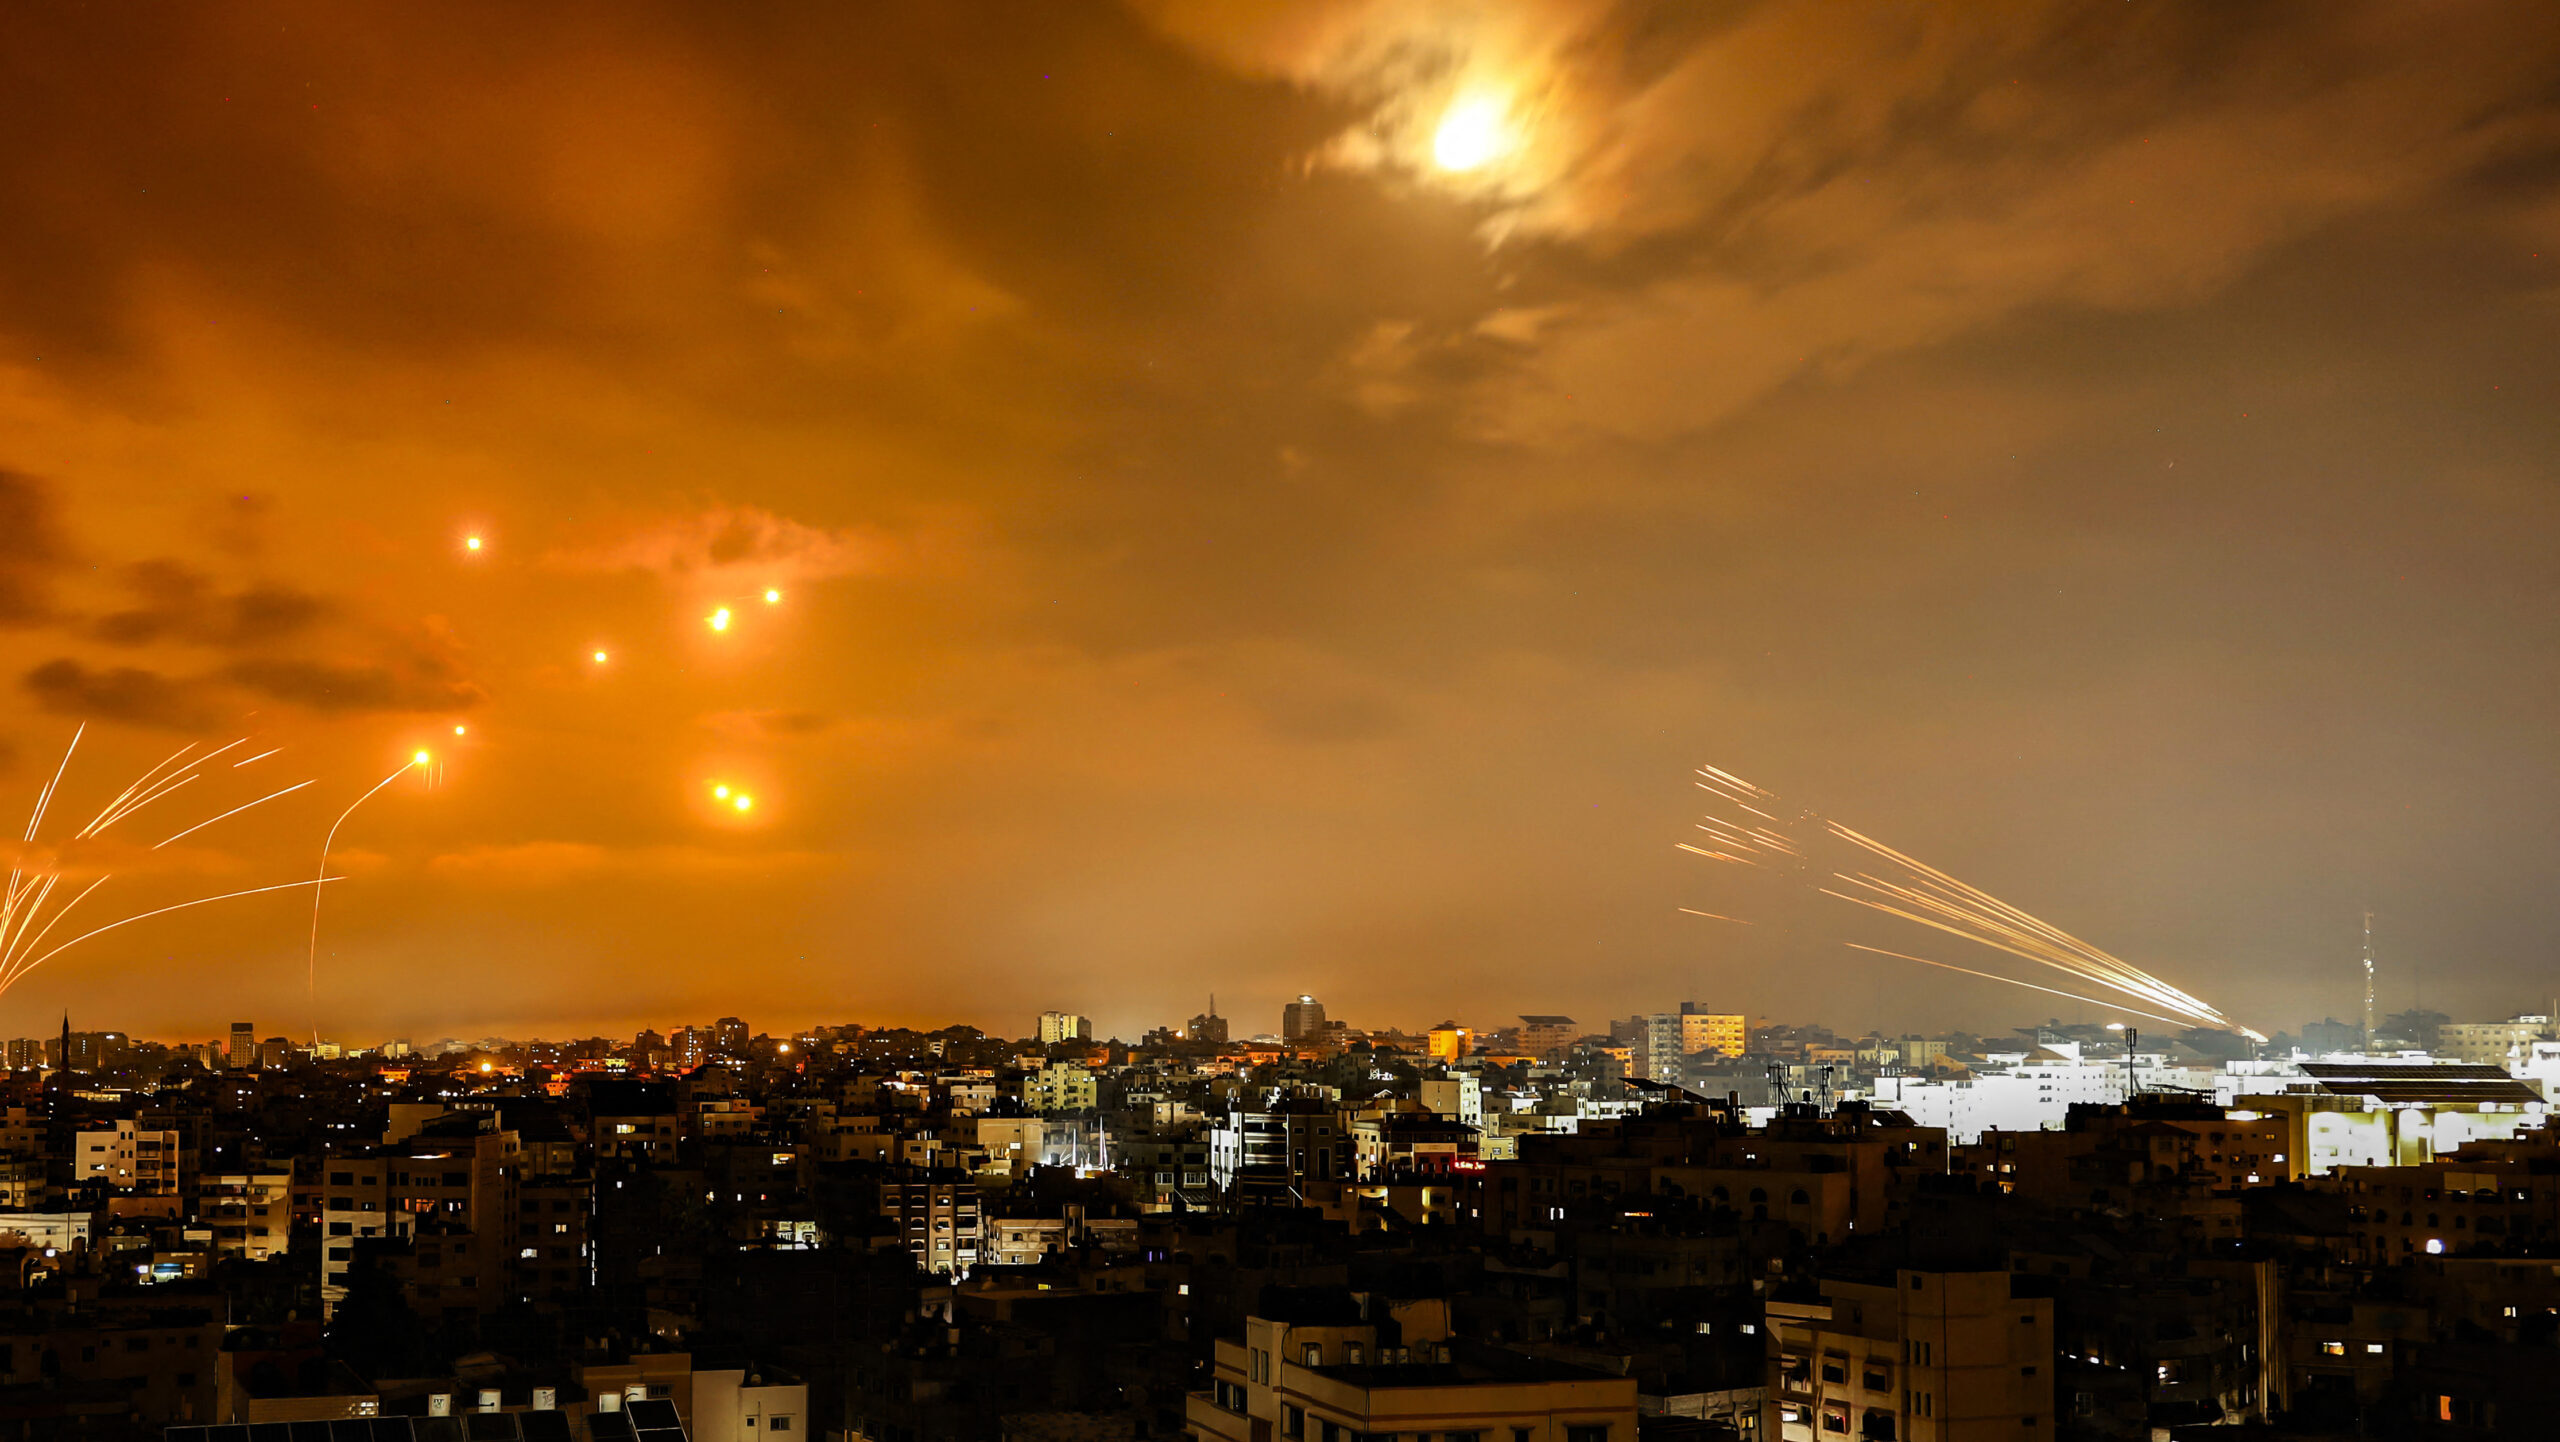 US expedites munitions for Israel, moves ships and aircraft into region after Hamas attack